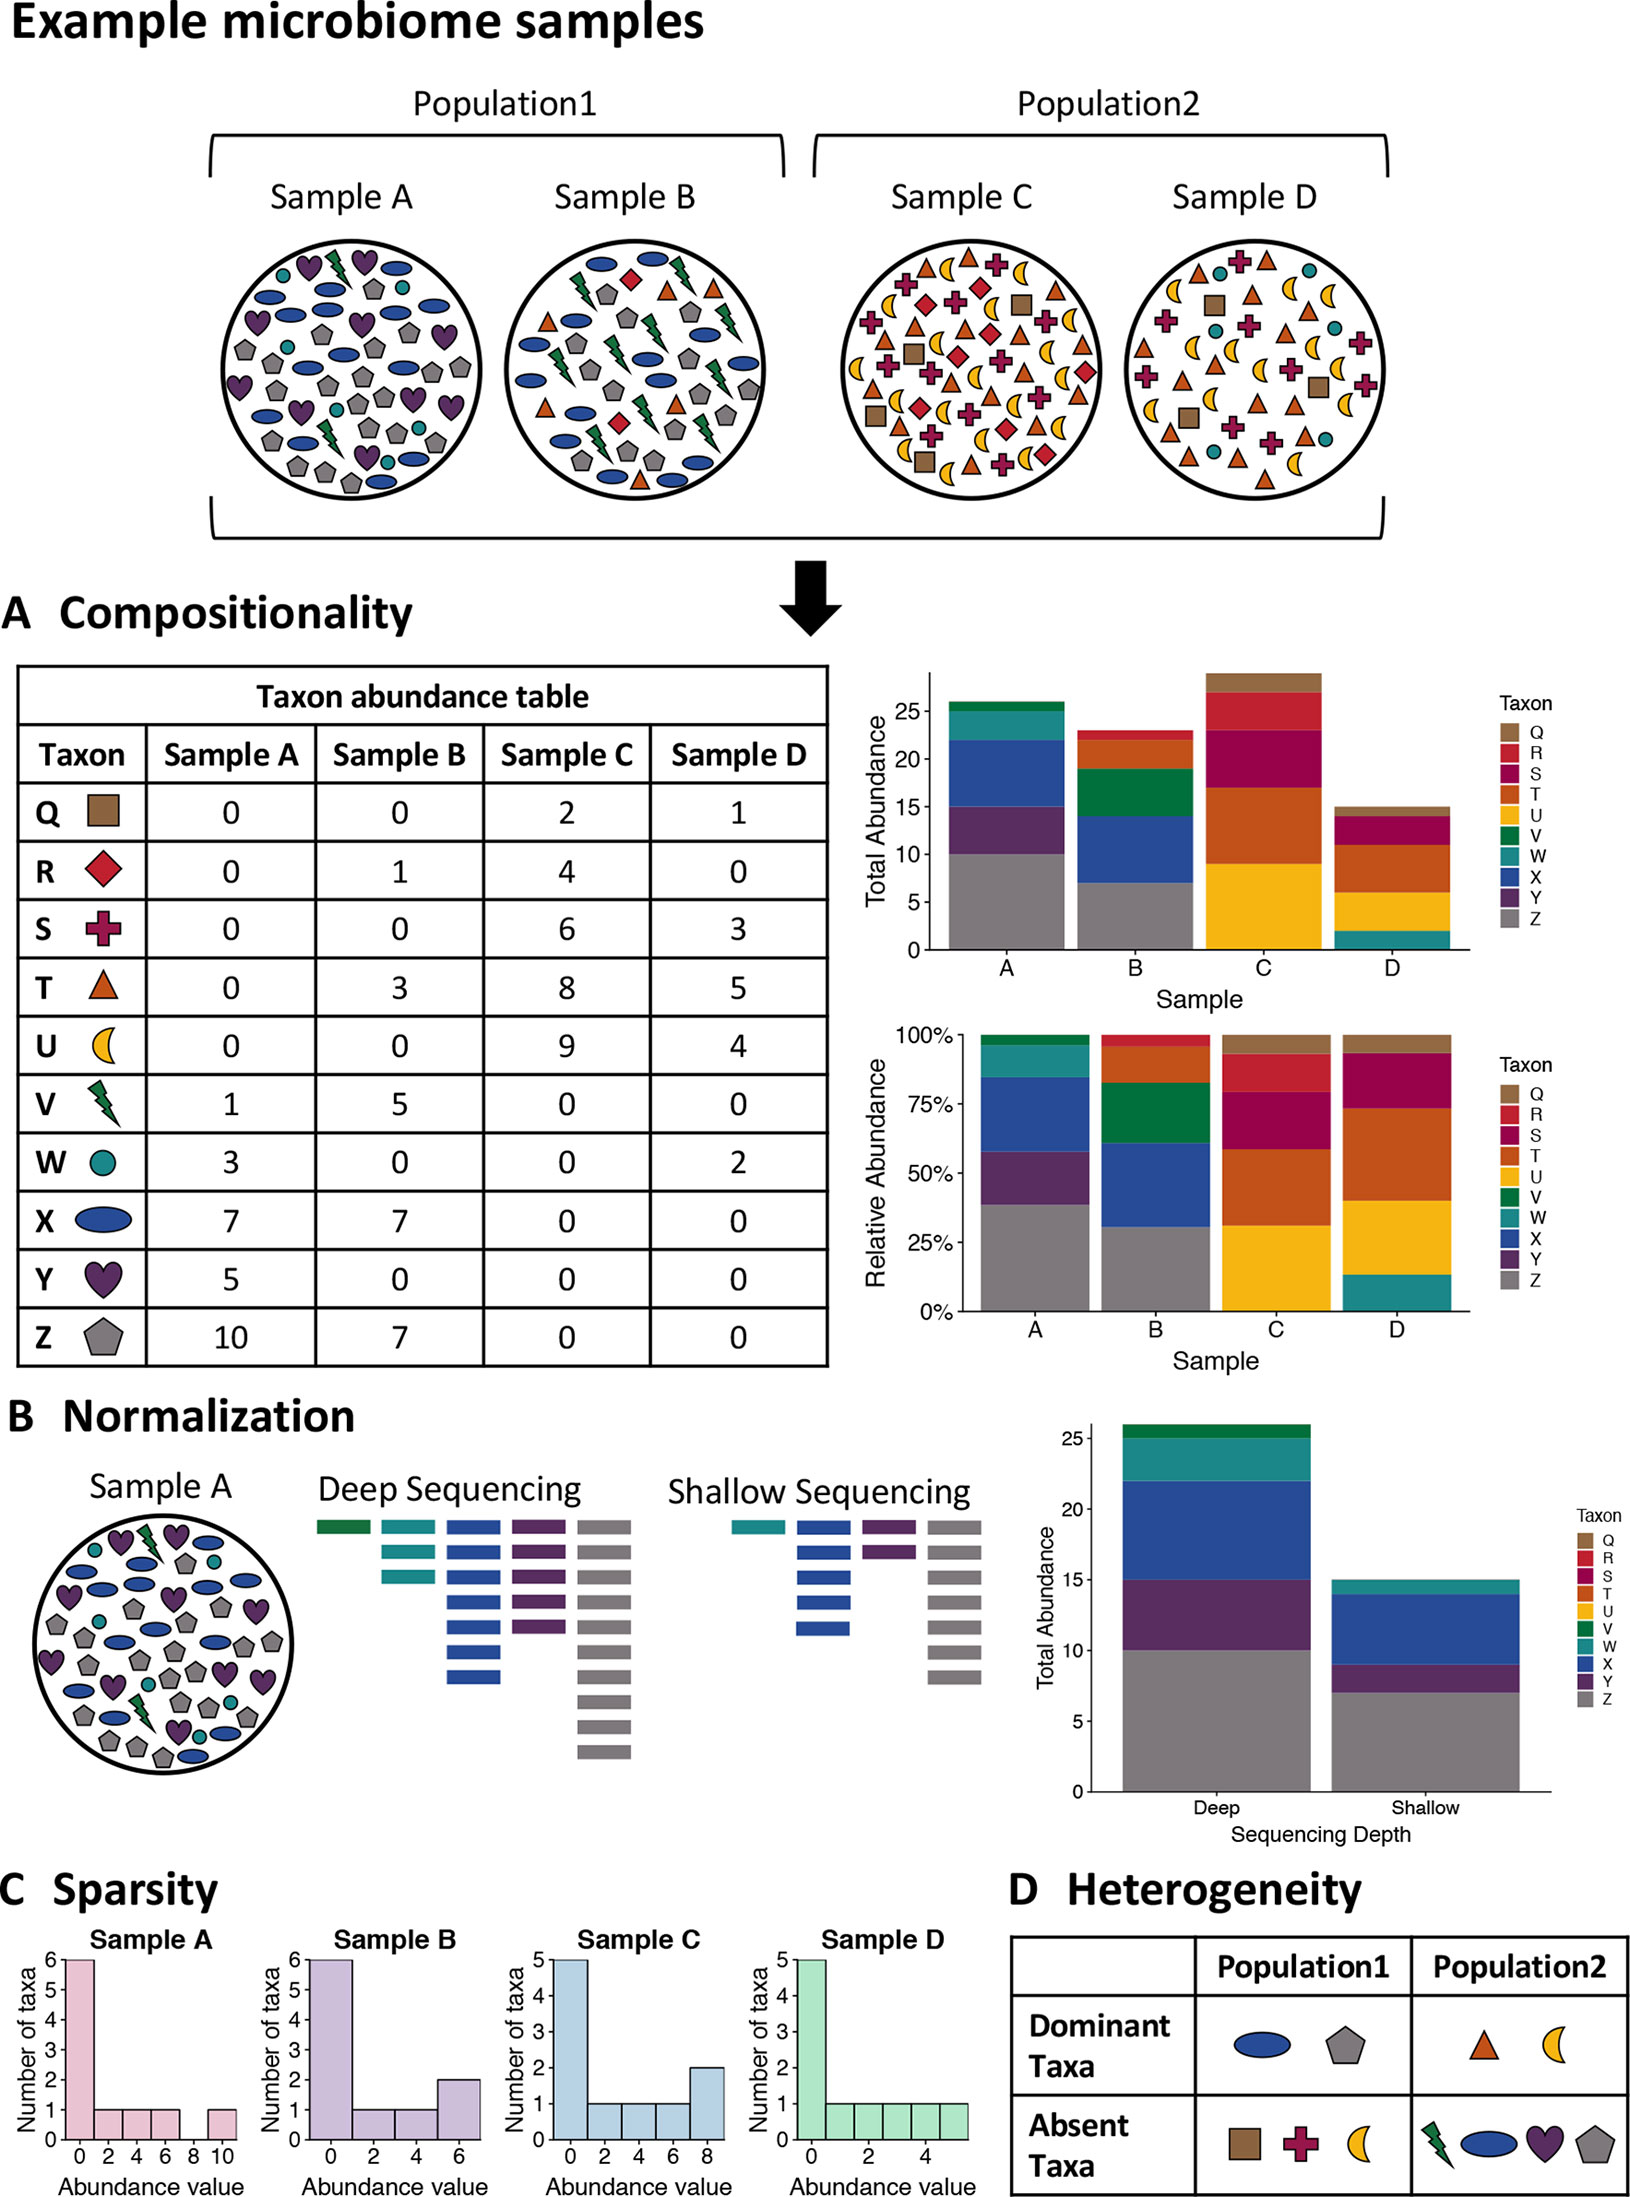 Challenges of microbiome data include compositionality, normalization, sparsity, and heterogeneity.